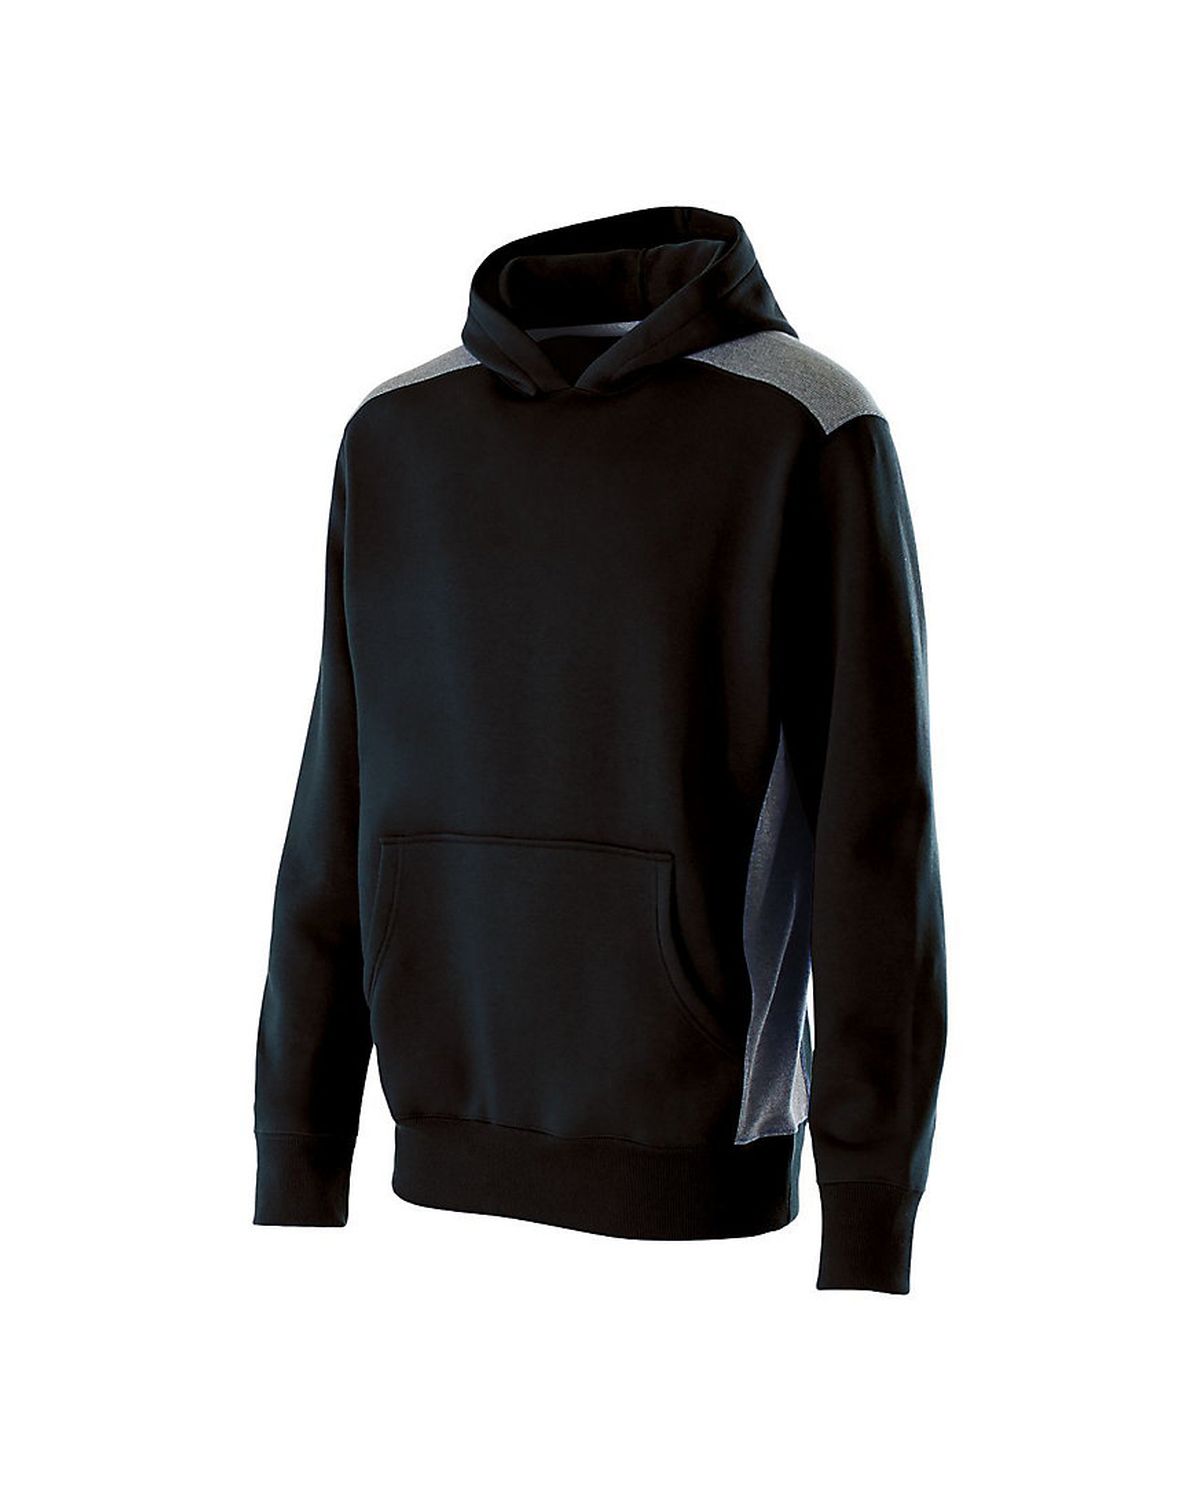 'Holloway 229288-C Youth Breakout Hoodie'